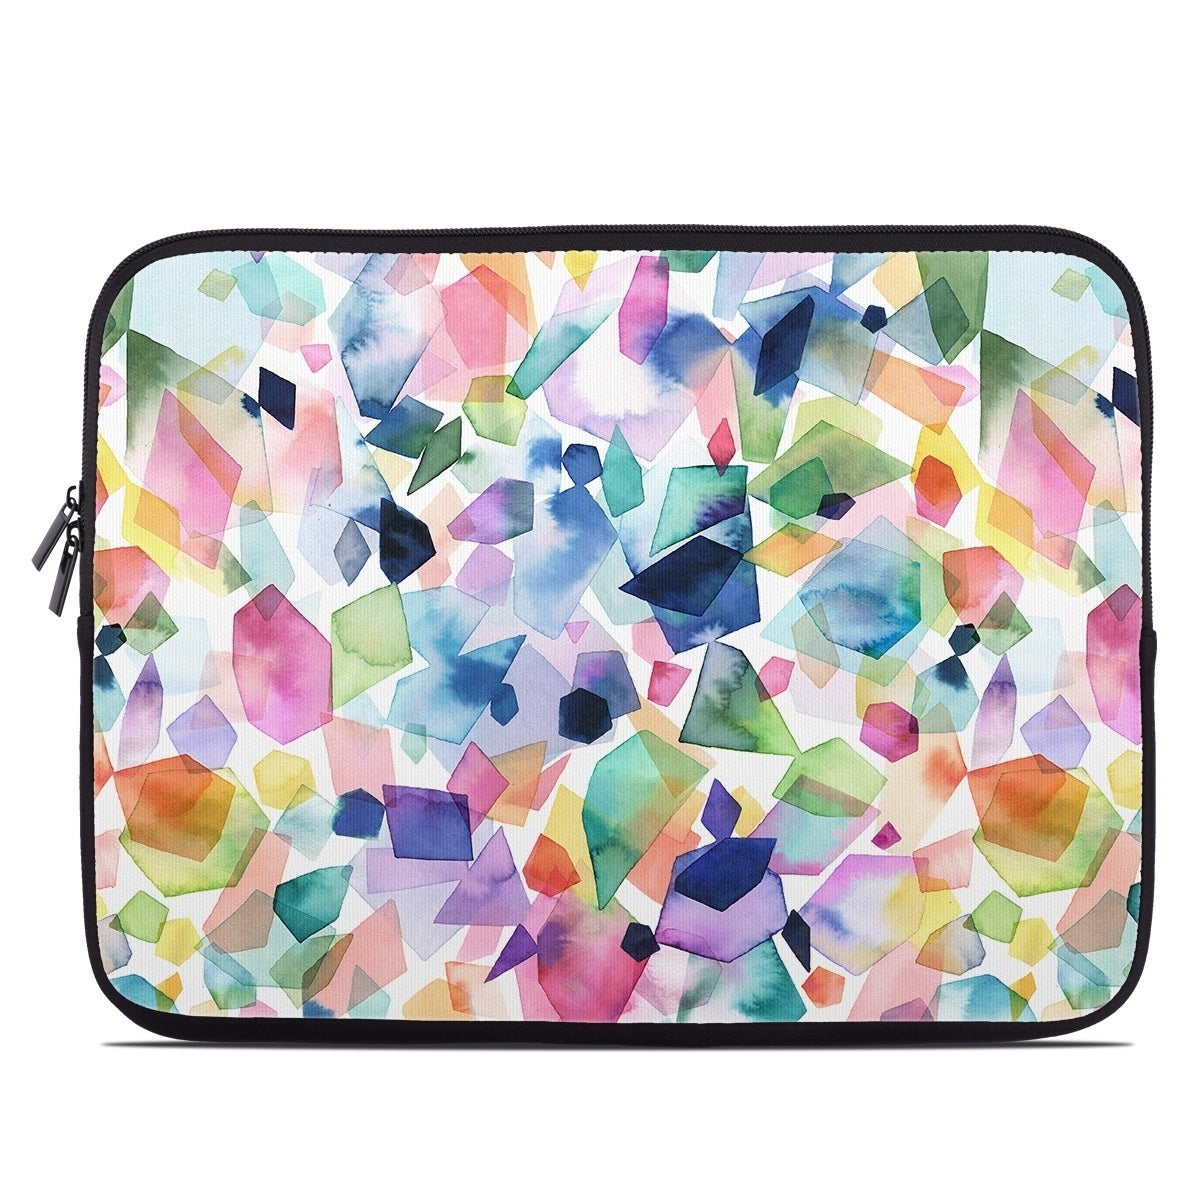 Watercolor Crystals and Gems - Laptop Sleeve